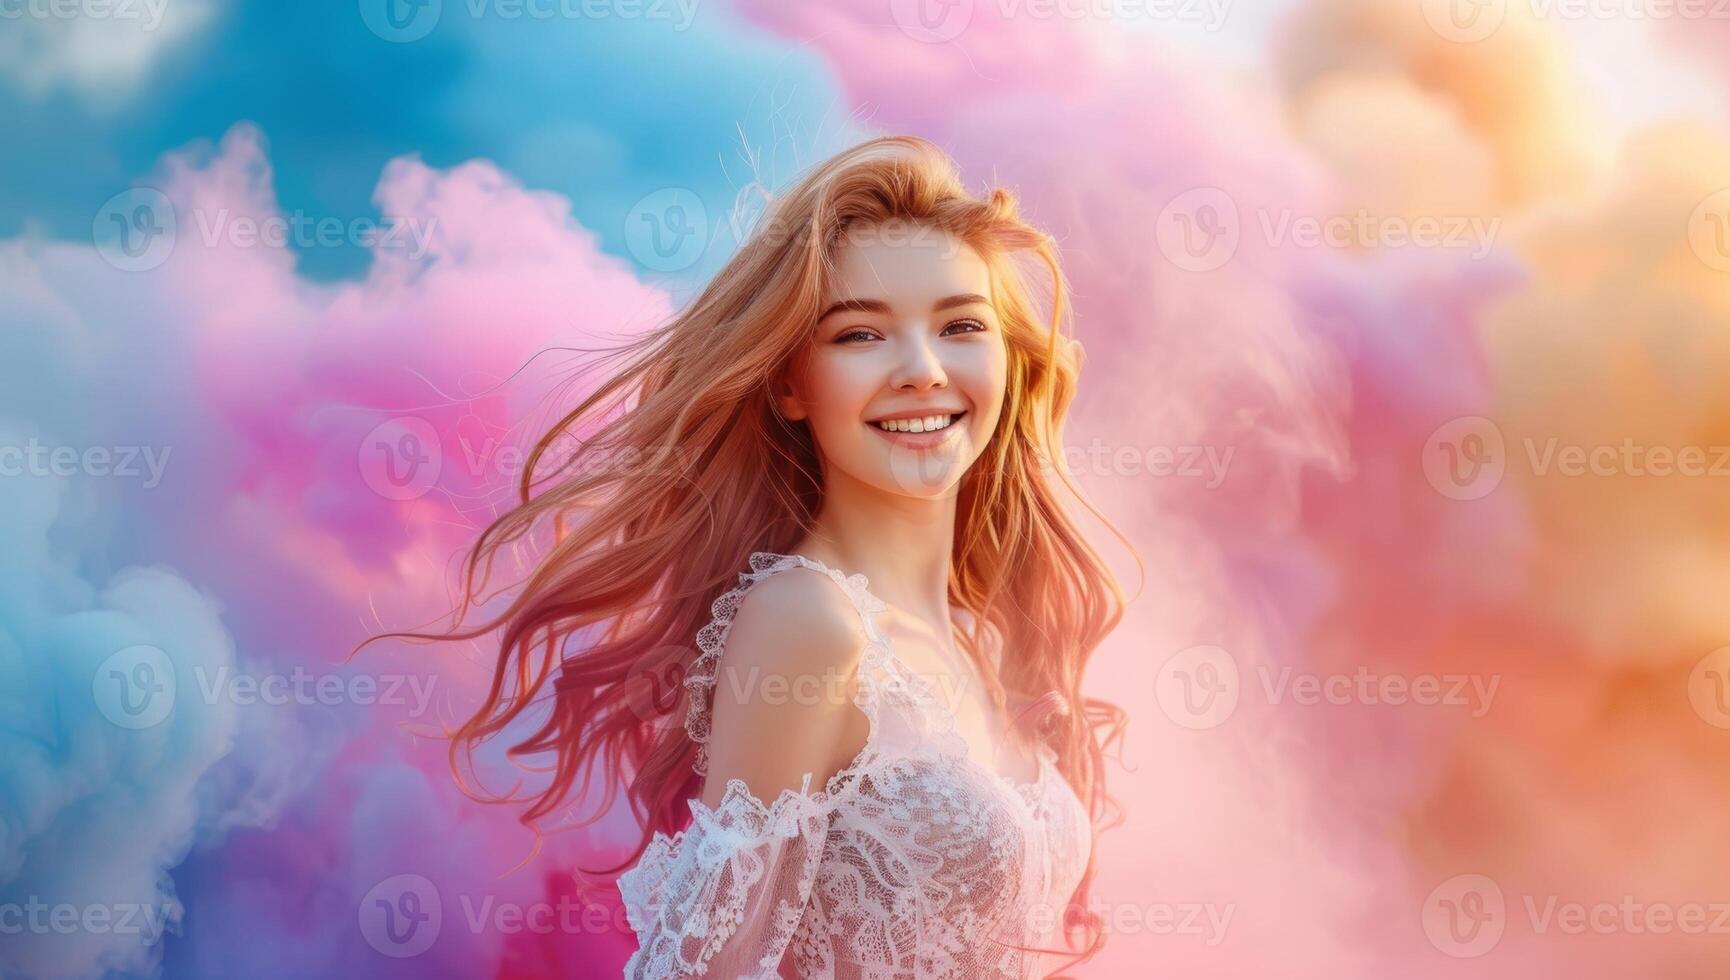 AI generated Portrait of a beautiful young woman with long curly hair in a white lace dress on a background of colored clouds photo